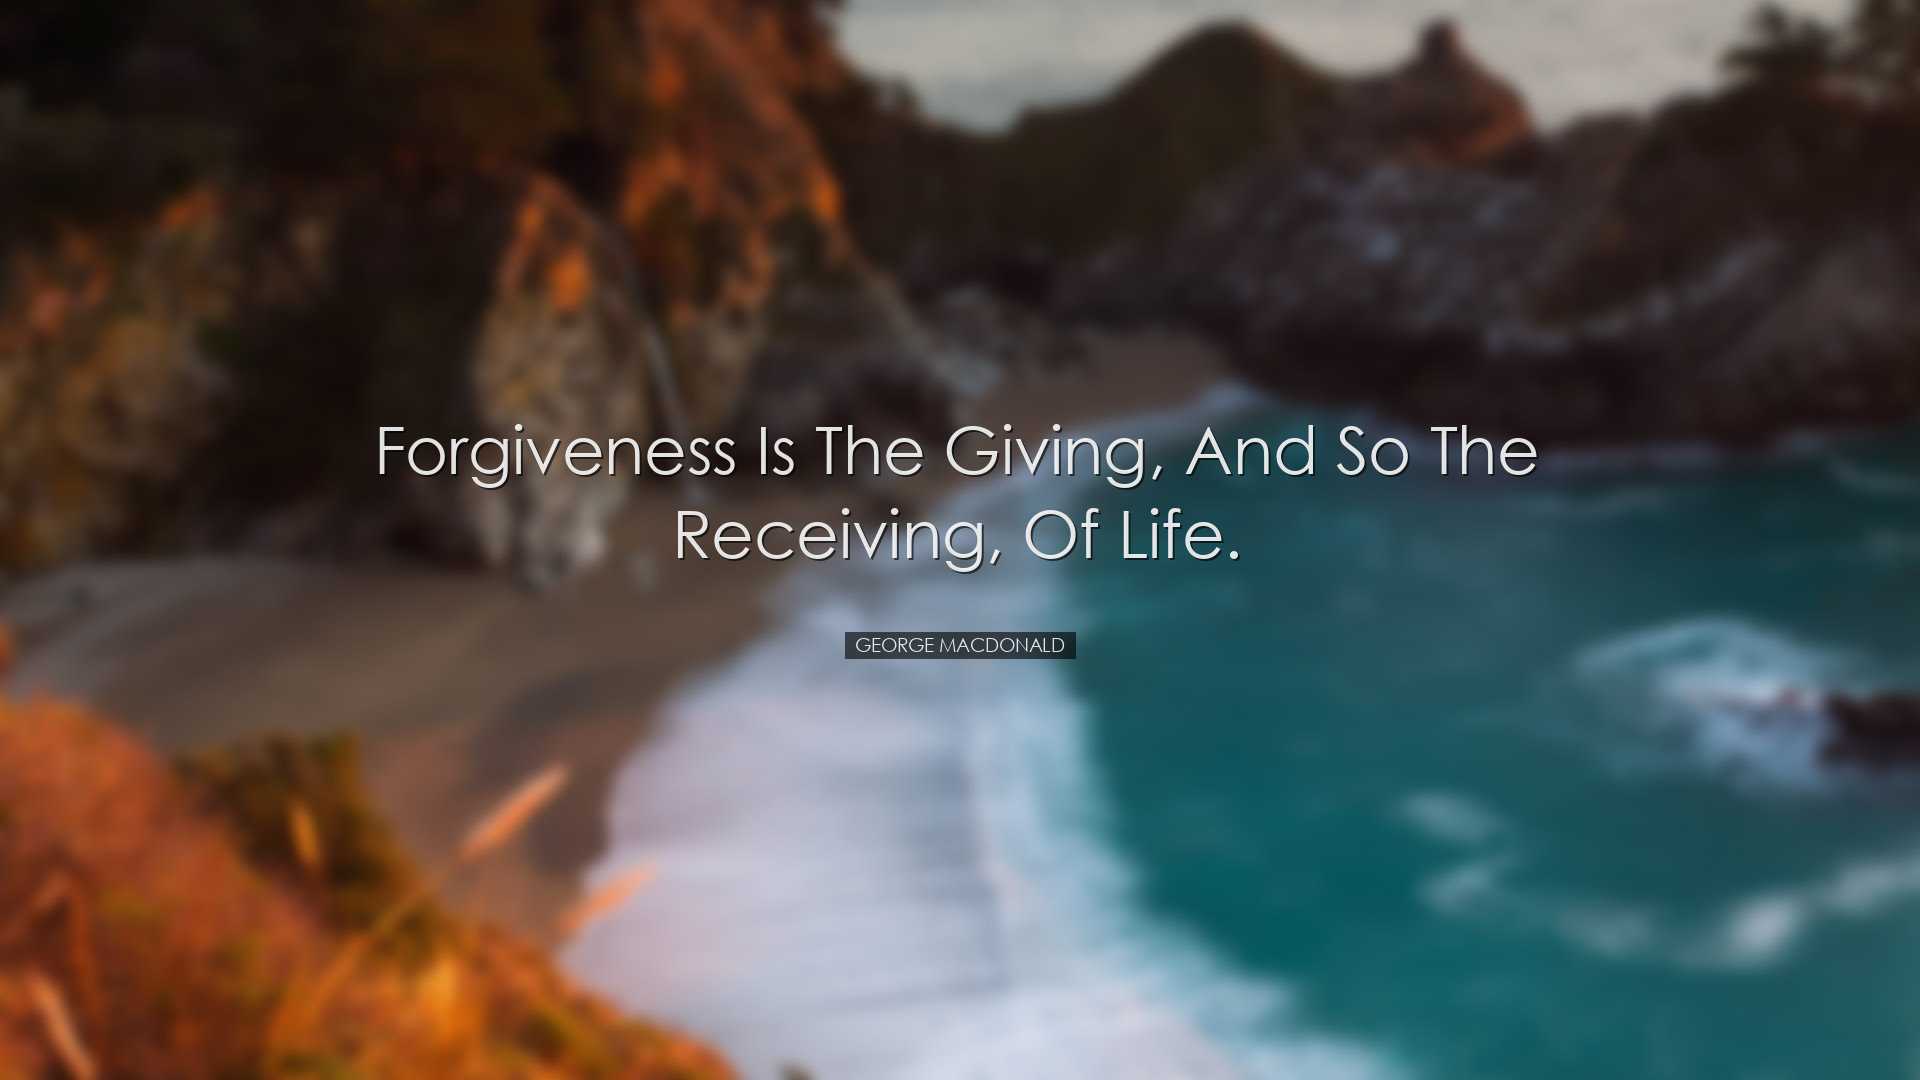 Forgiveness is the giving, and so the receiving, of life. - George